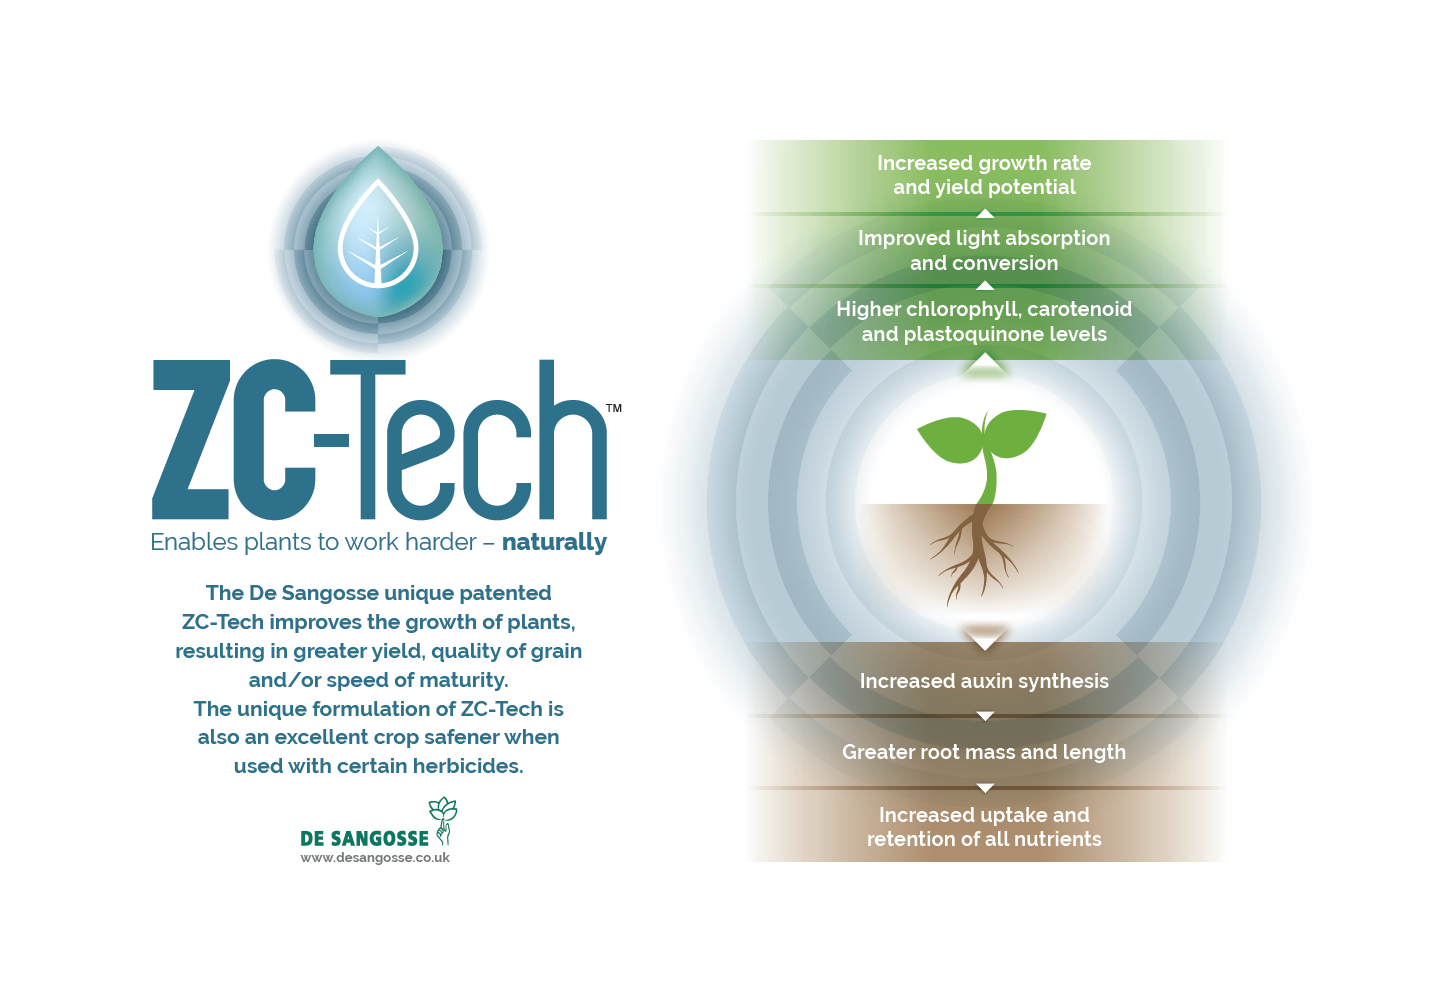 ZC Tech description : Enables Plants to Work Harder - Naturally. The DeSangosse patented ZC Tech improves the growth of plants, resulting in greater yield, quality of grain and speed of maturity. The unique formulation of ZC-Tech is also an excellent crop safener when used with certain herbicides.